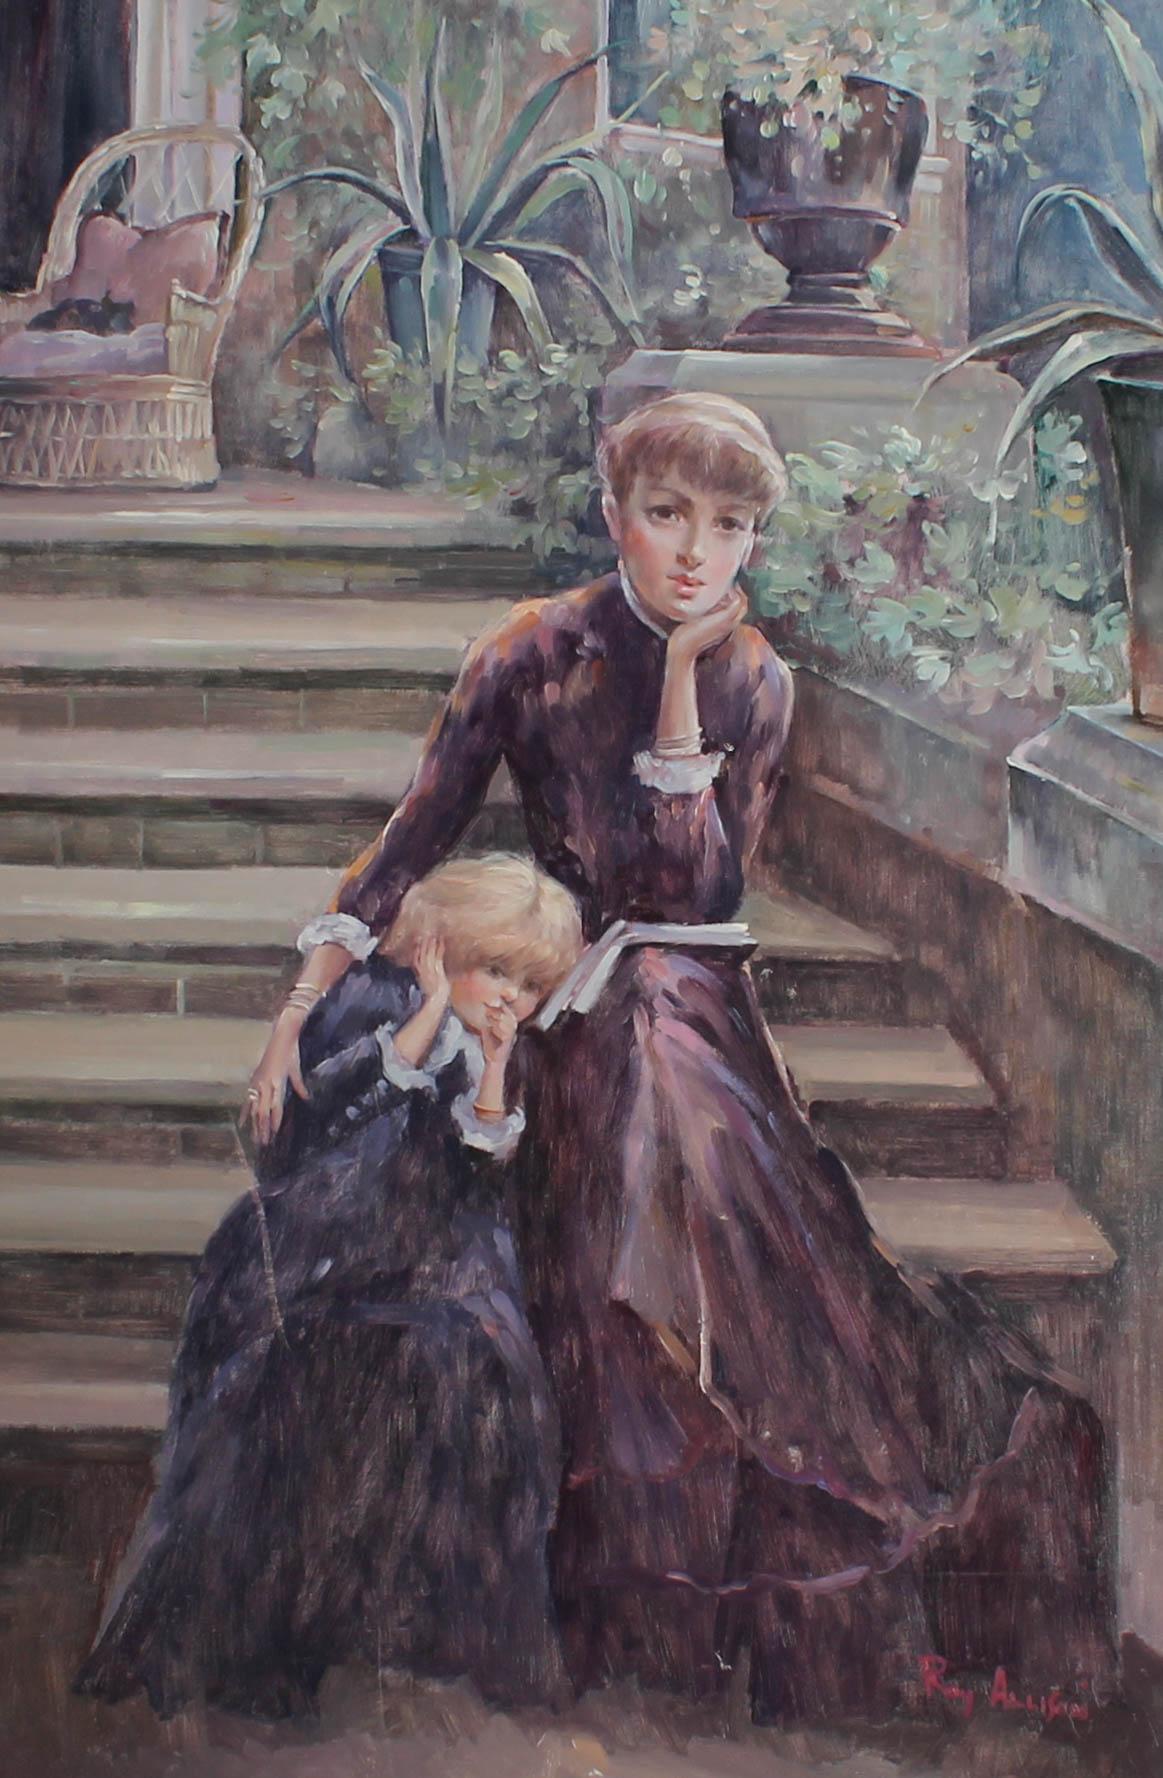 A striking 20th Century portrait, likely after one of the early Impressionists as the artist is known for his copies of paintings from this movement, particularly those of Renoir and Manet. The scene shows a beautiful young mother in an elegant